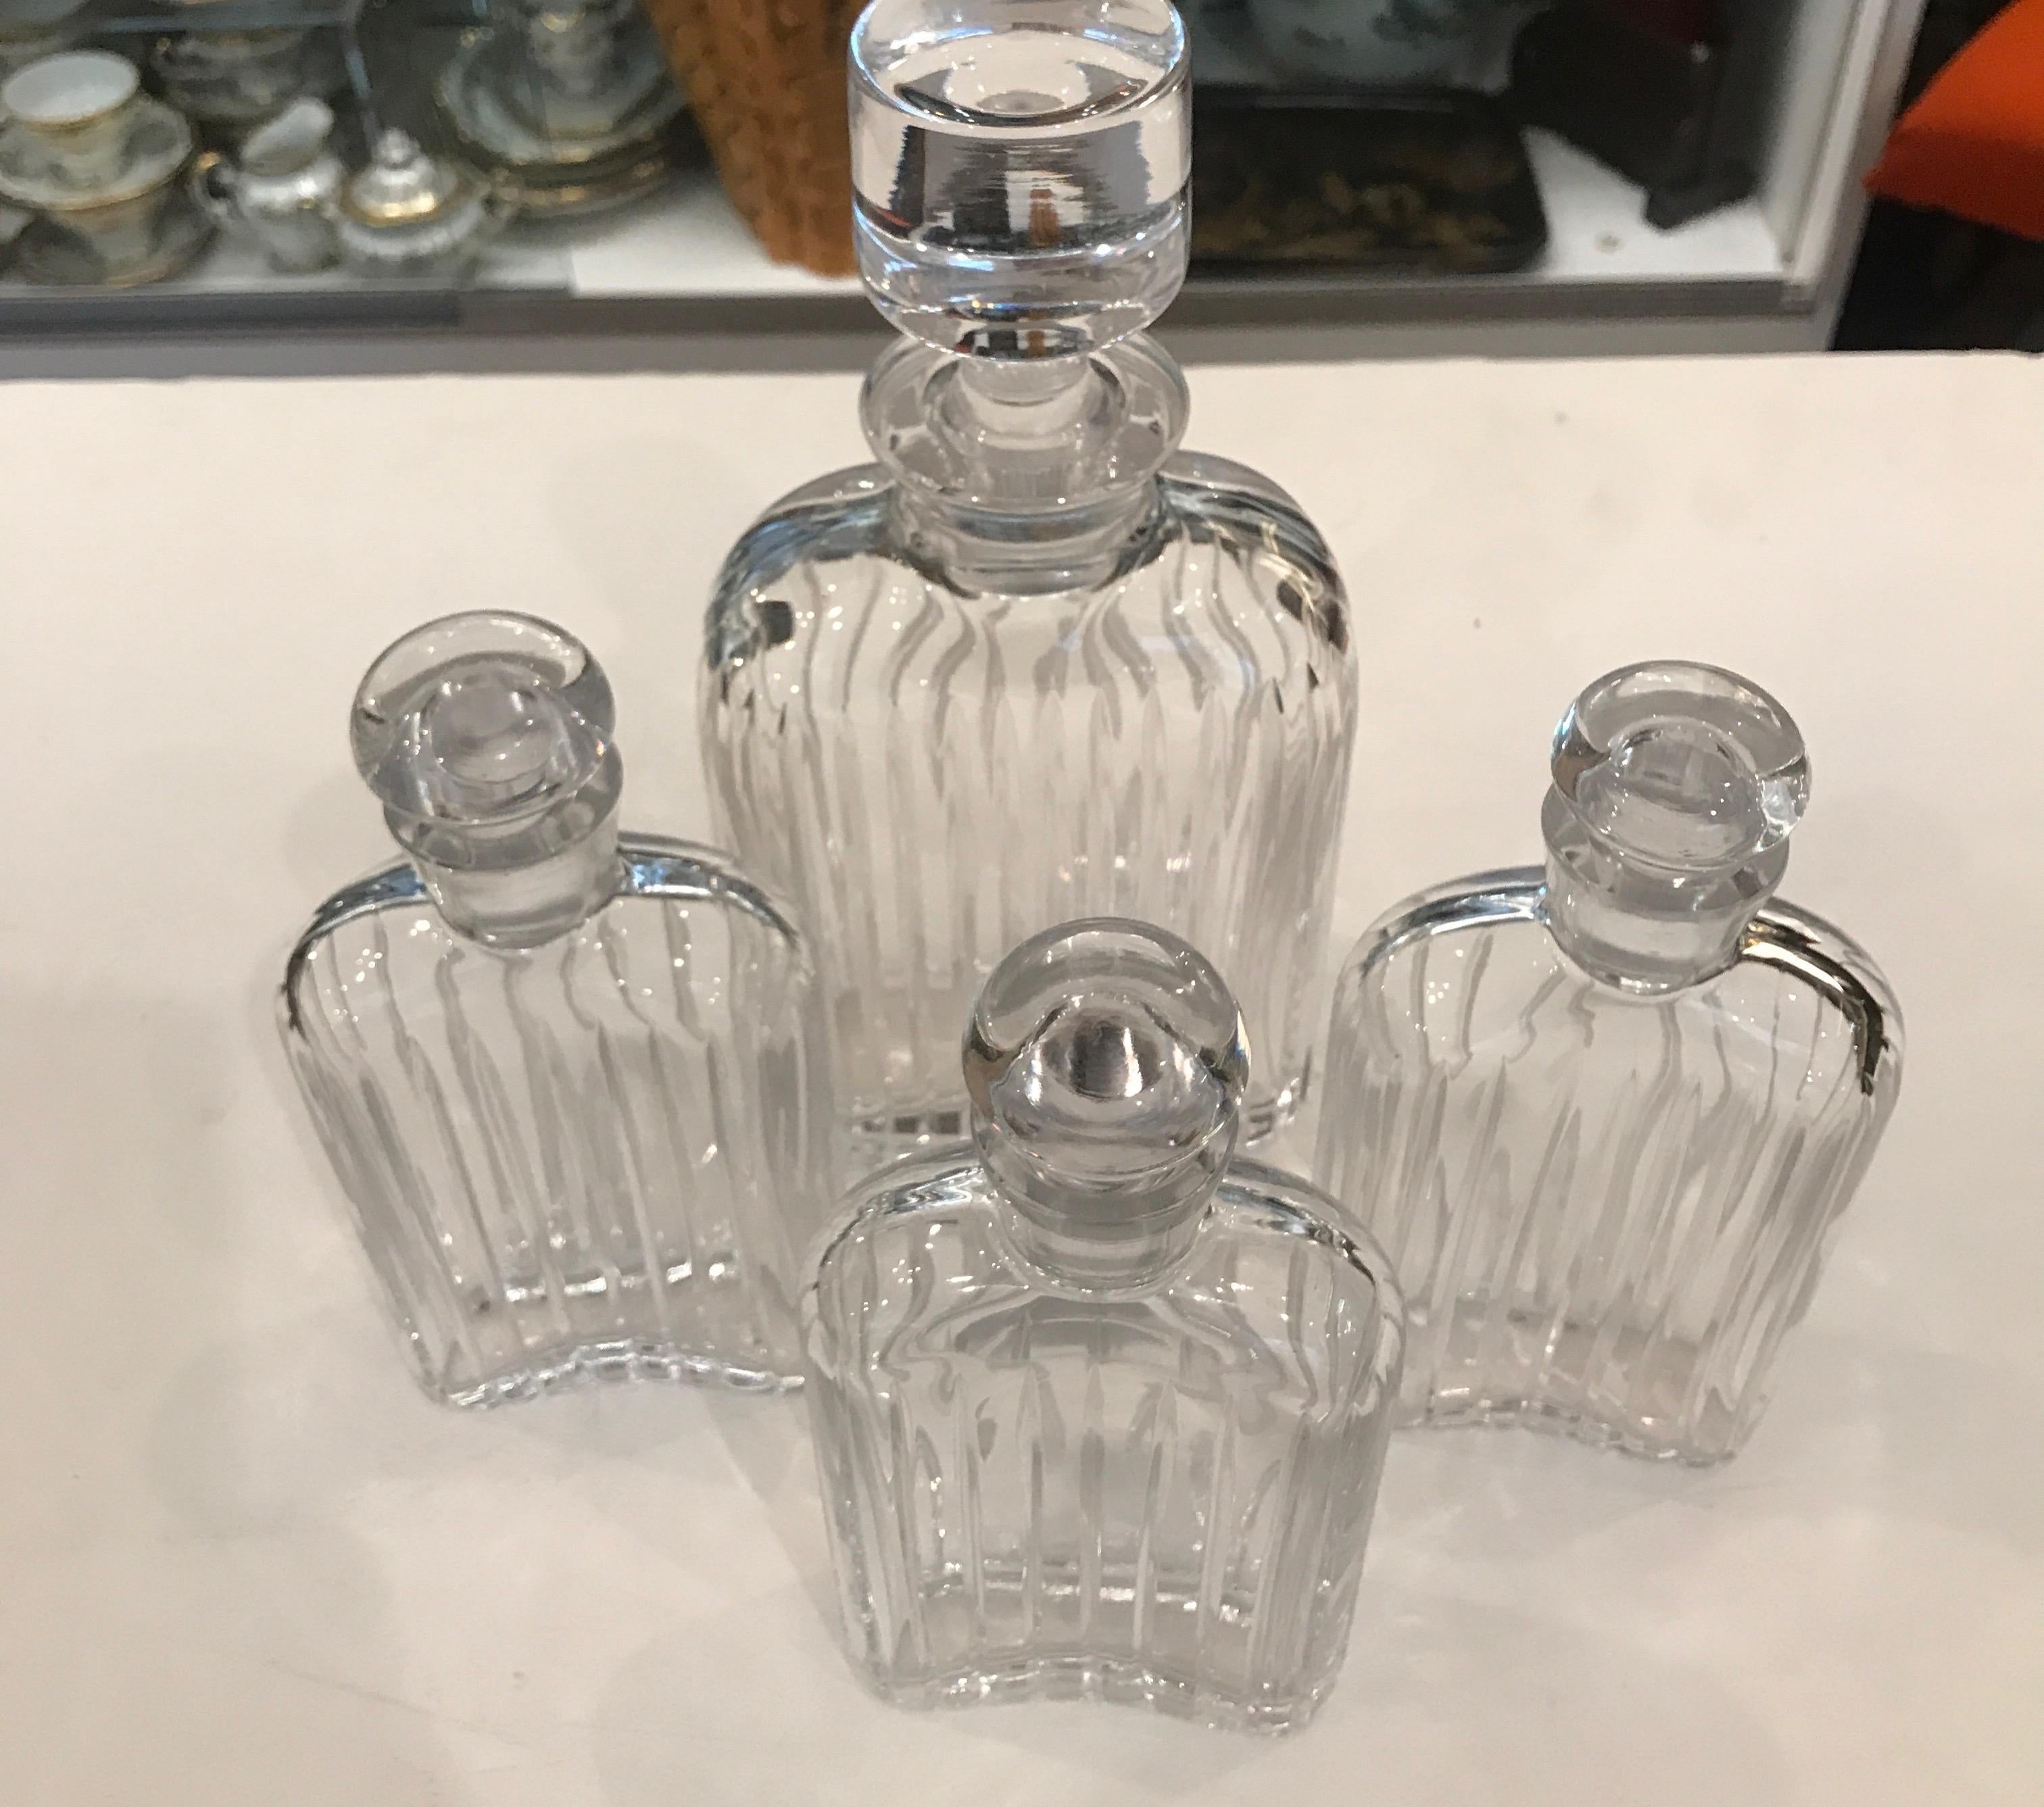 Four crystal decanters one large and three smaller in the form of flasks. The crystal bottle form with three shaped like antique style flasks. elegant Art Deco style, the pattern is similar to a Baccarat pattern but no markings on any of them, this